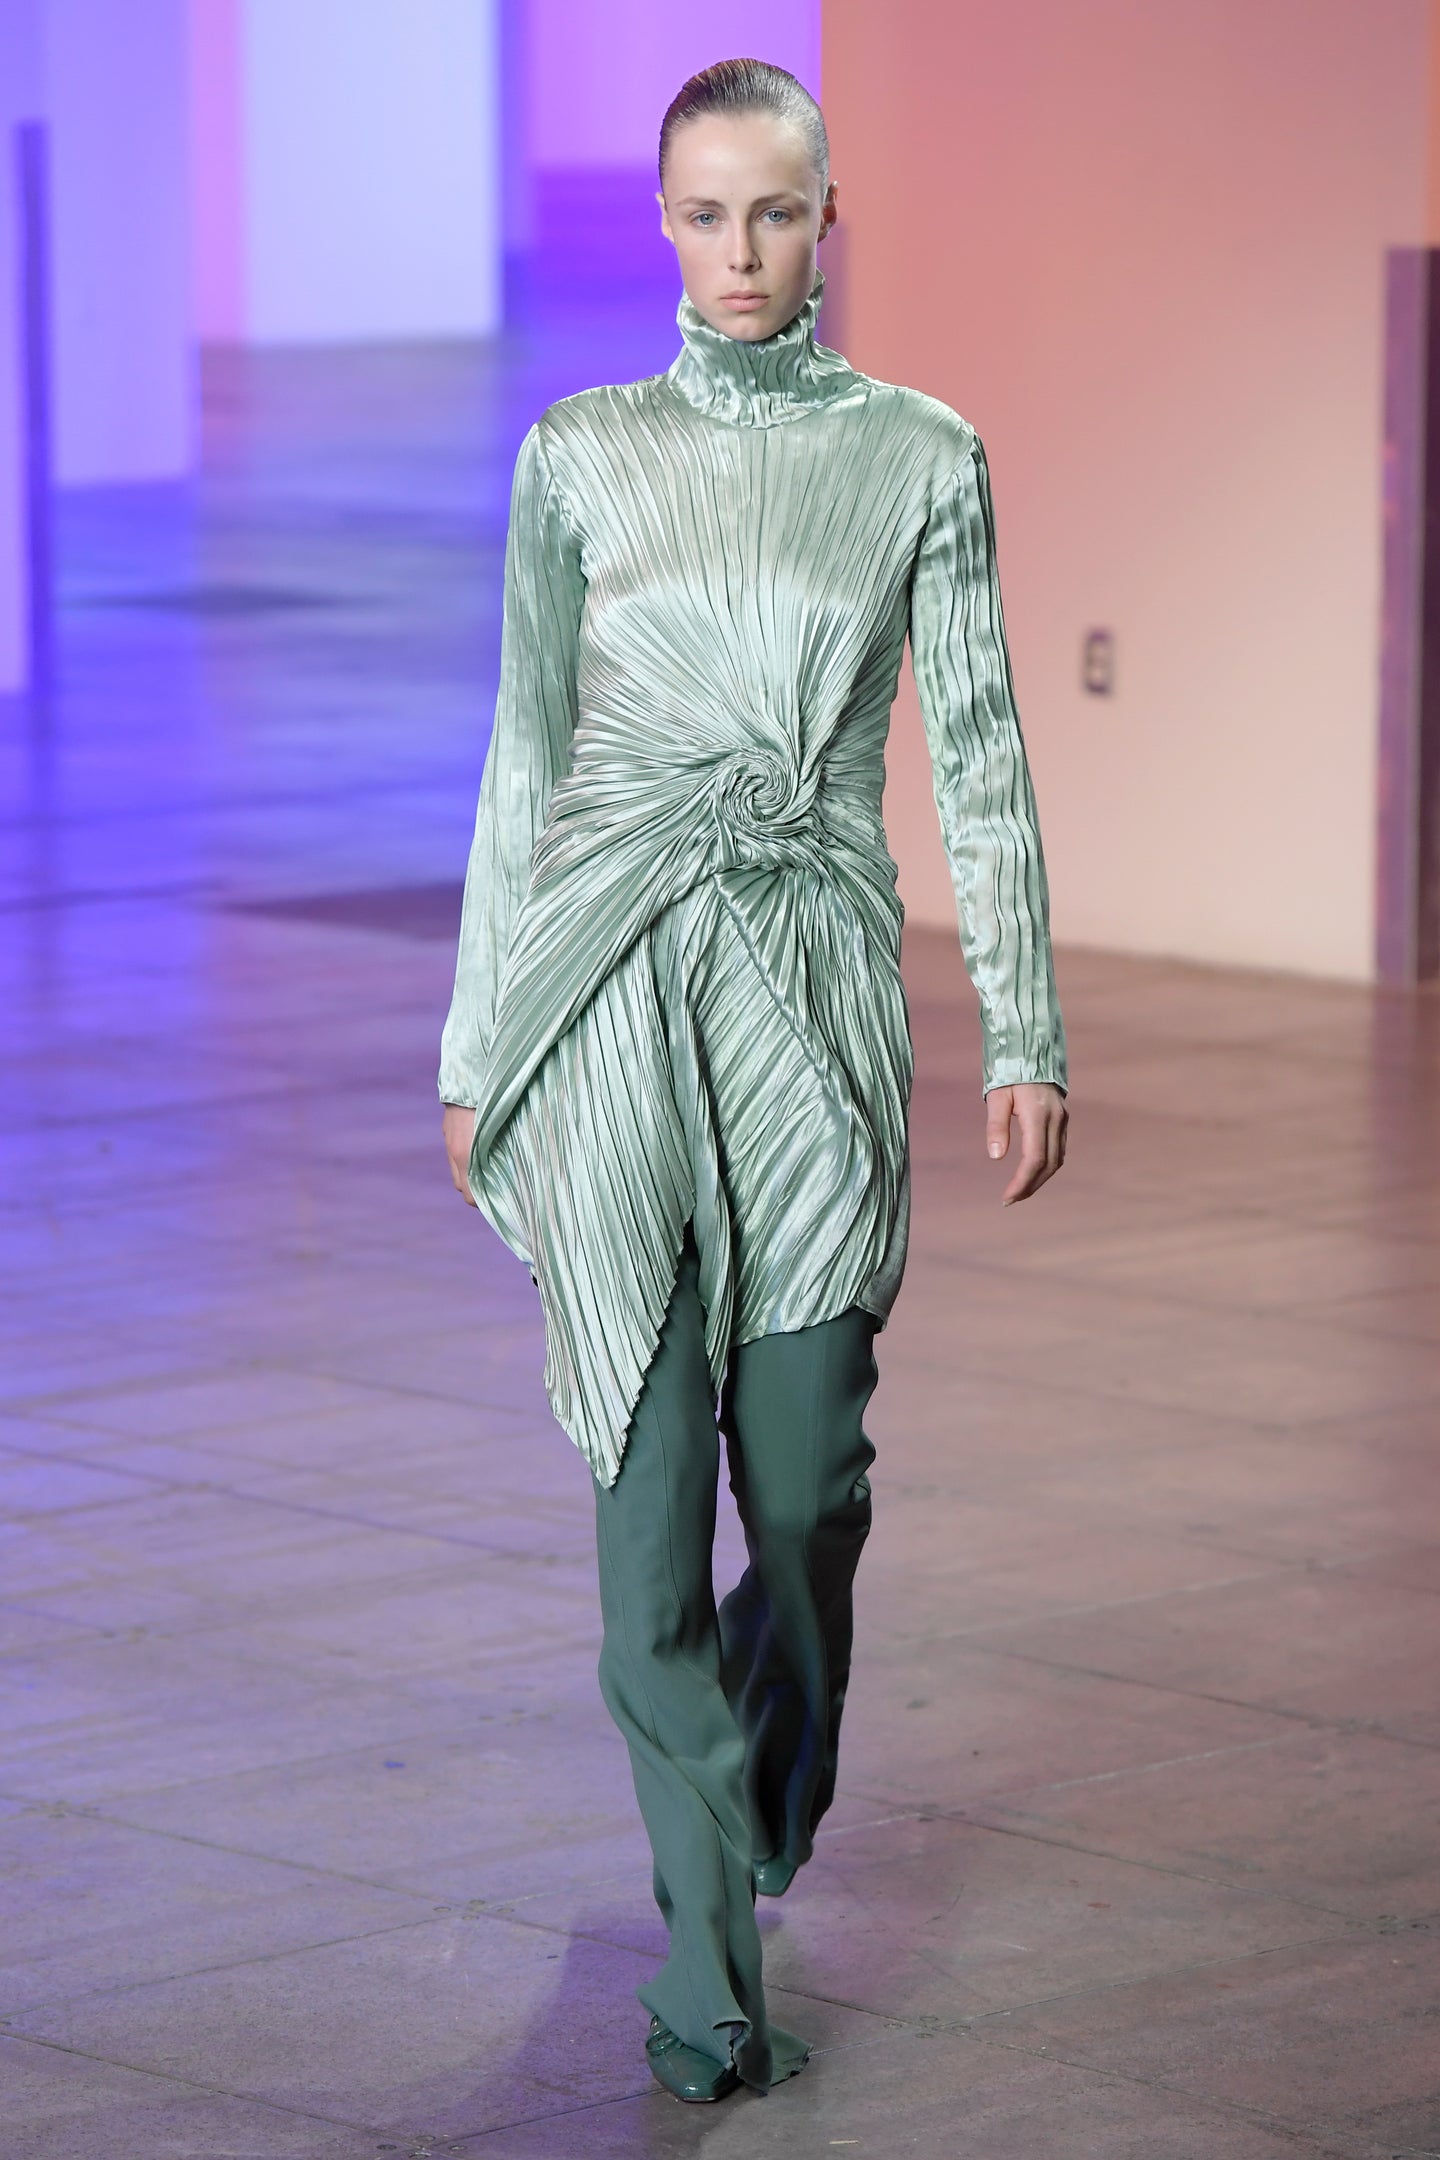 Look 1 from the Sies Marjan Fall/Winter 2018 runway show.